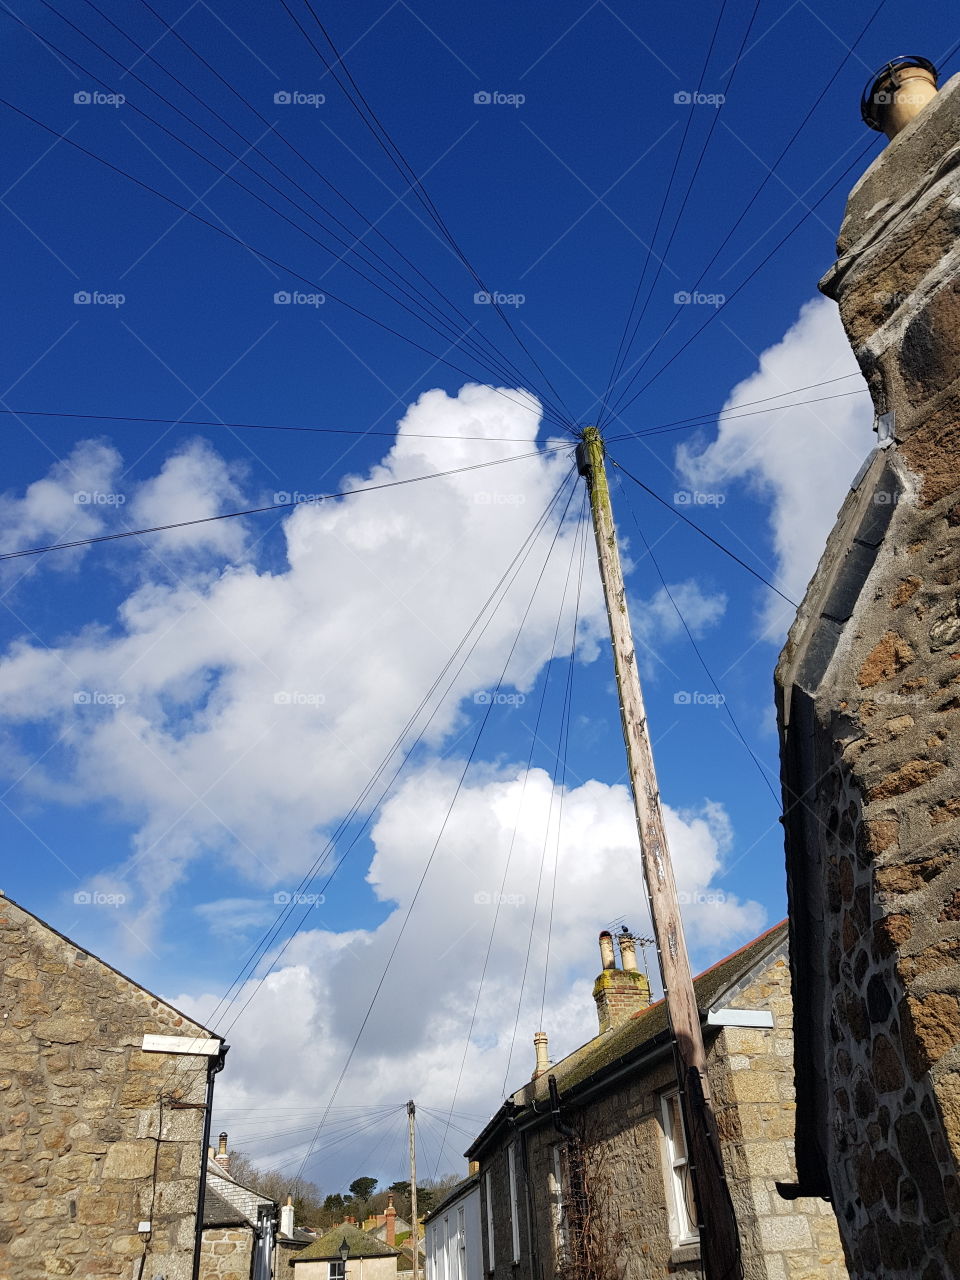 The thin wires cut through the clouds and blue sky to connect a small seaside village